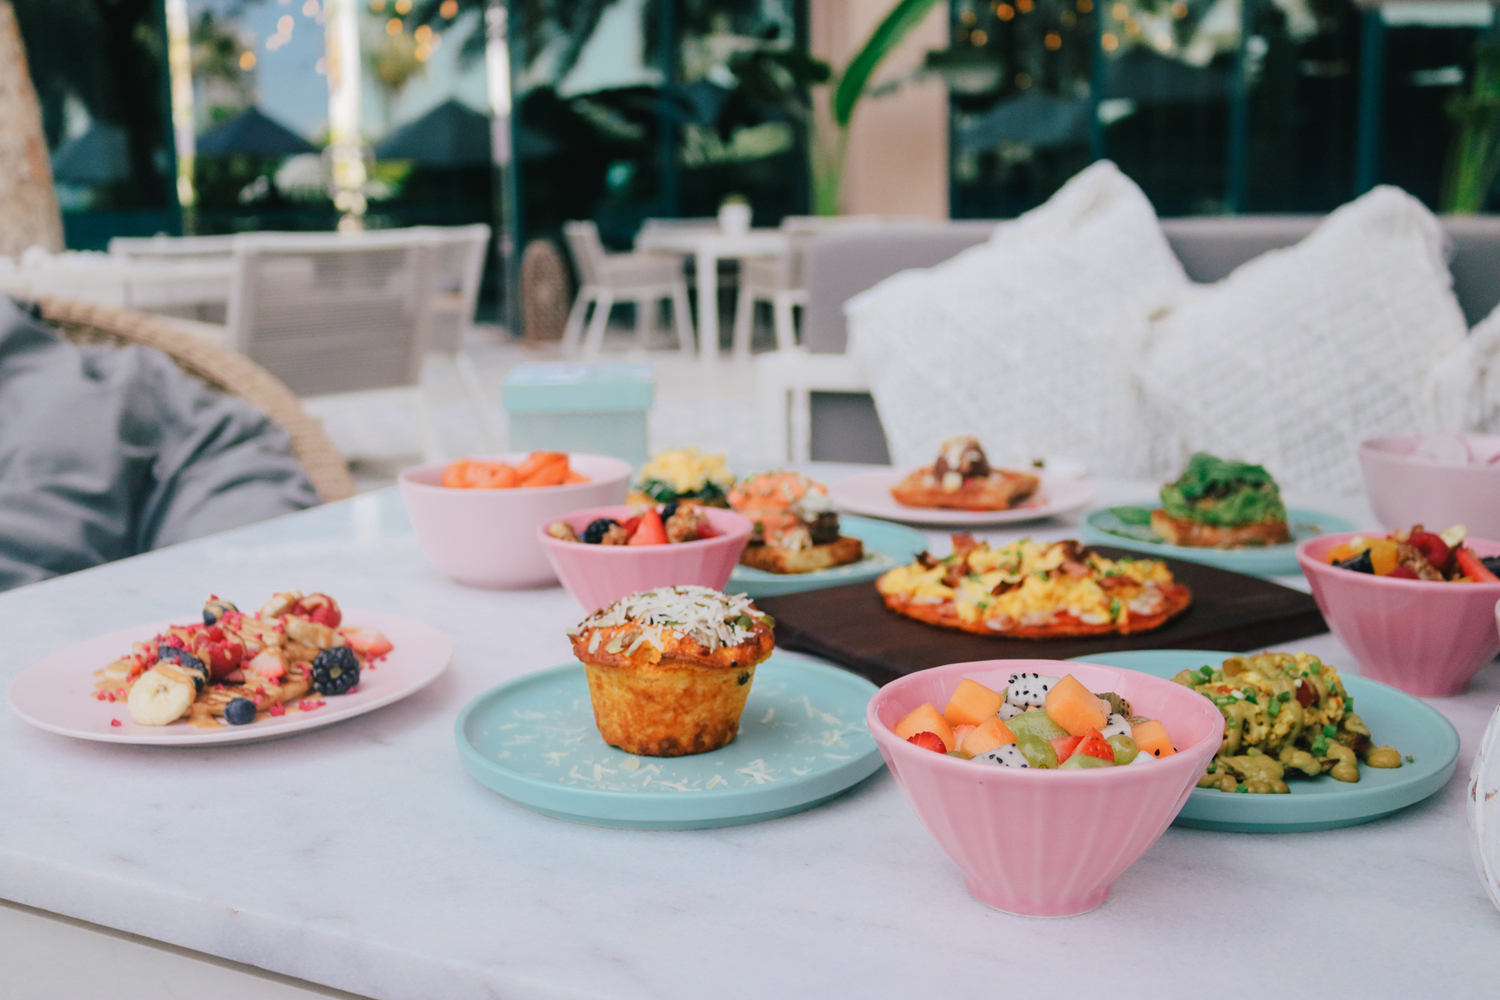 Bounty Beets in Dubai is a super cool spot, especially if you’re into vegan food